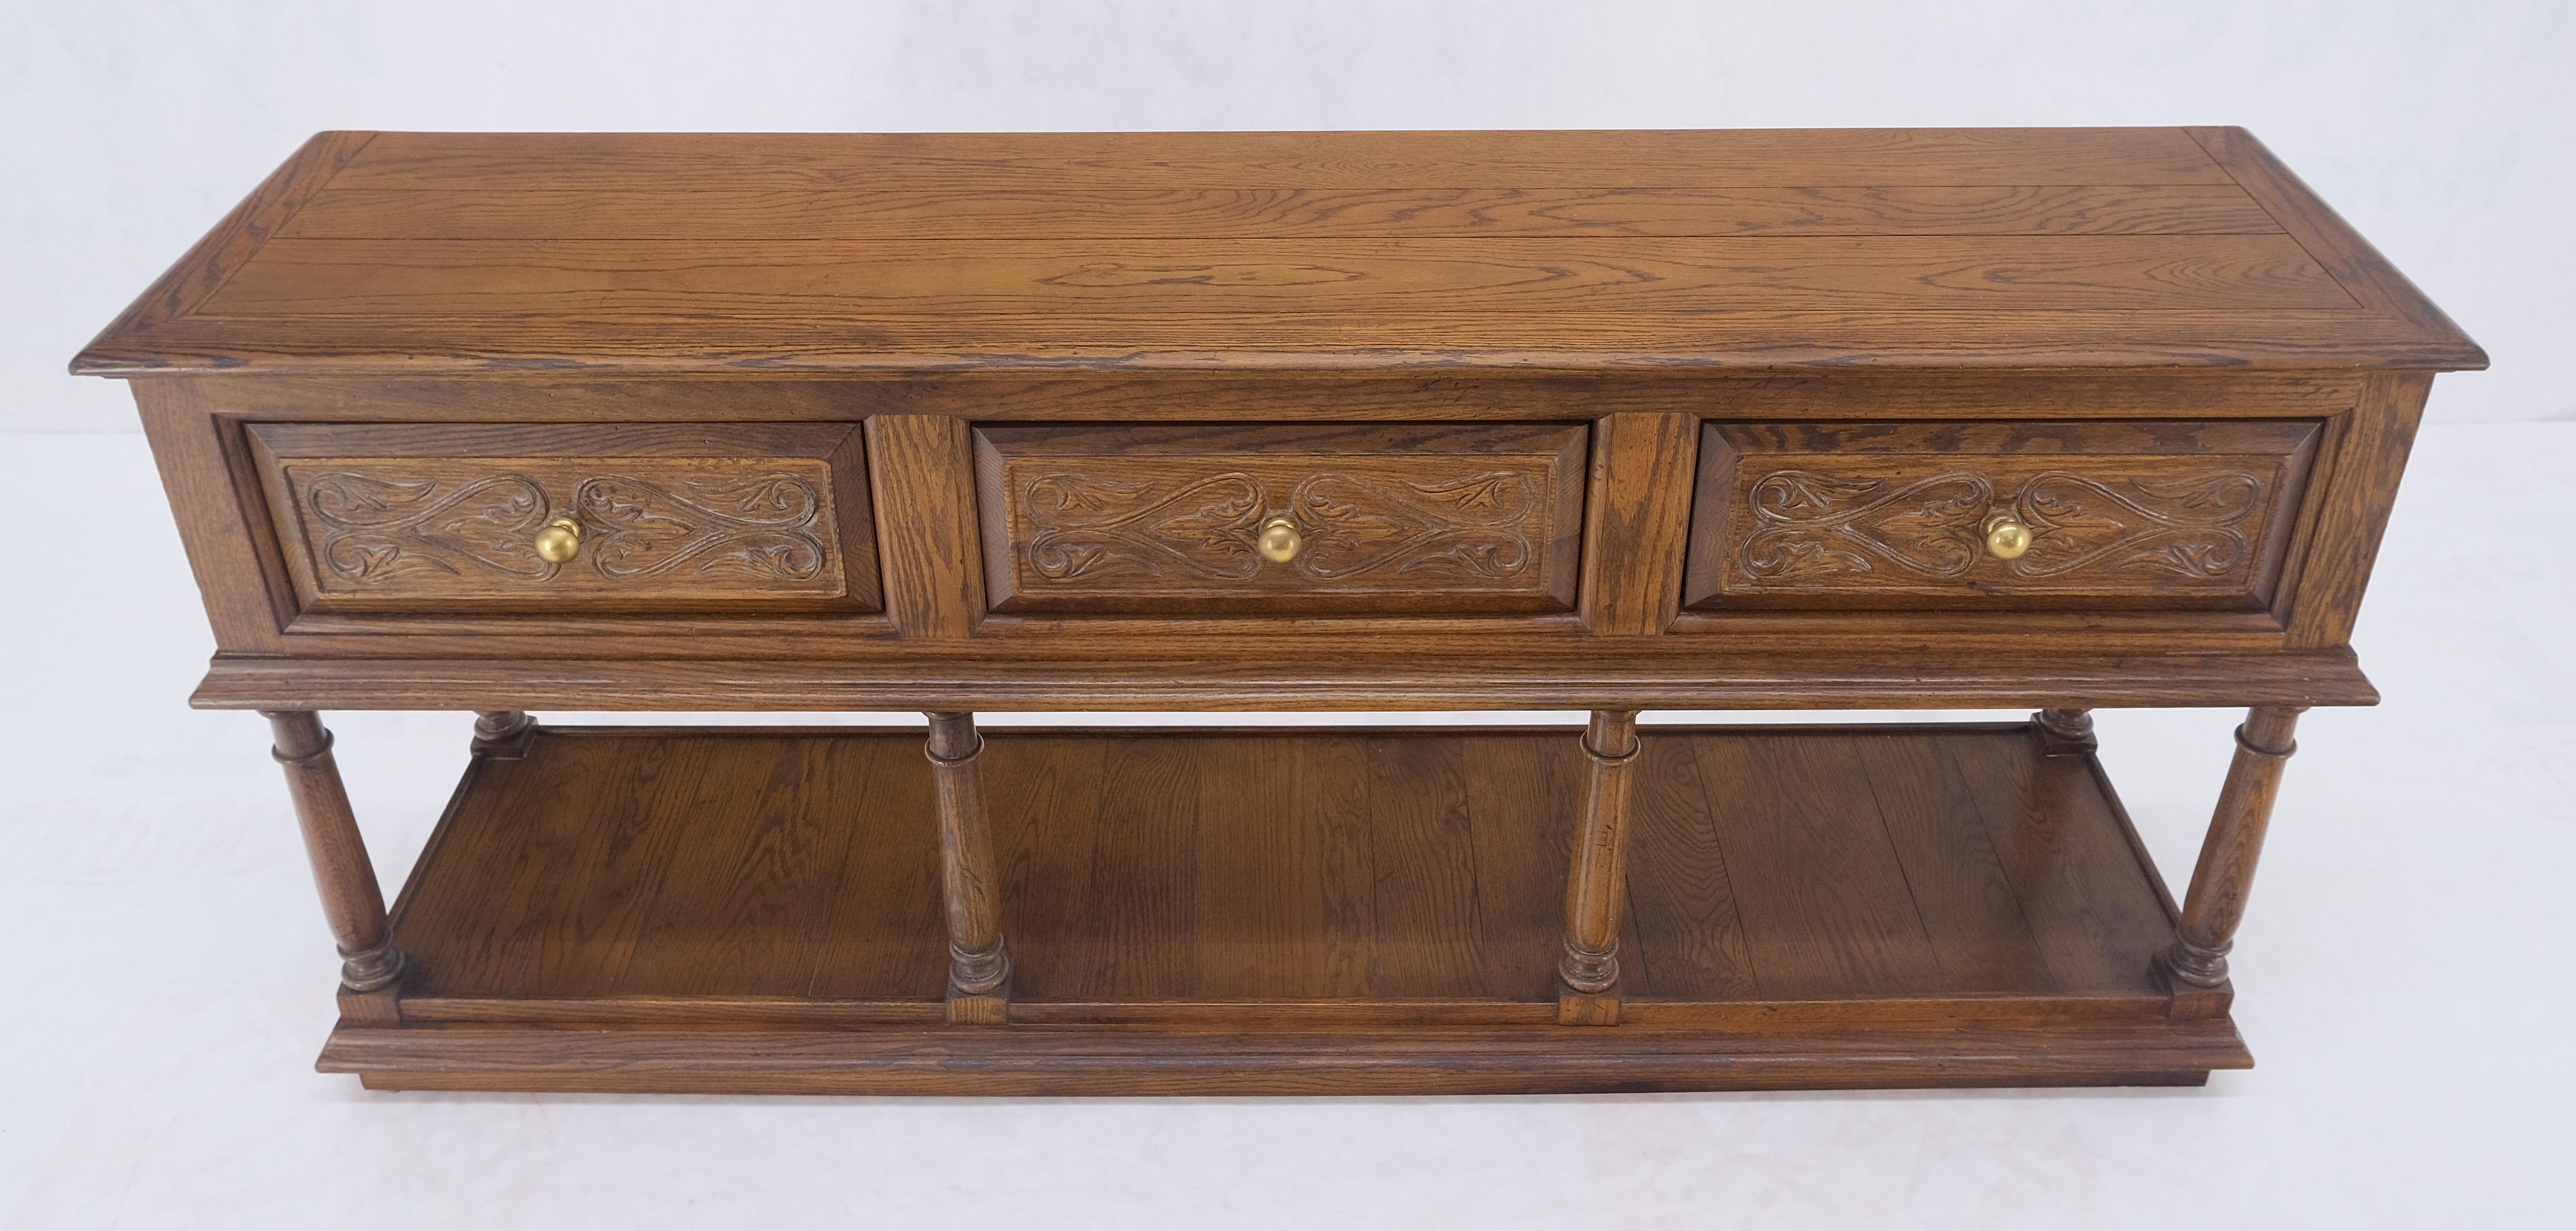 20th Century Spanish Colonial Carved Oak 3 Deep Drawer Sideboard Credenza Buffet Console MINT For Sale